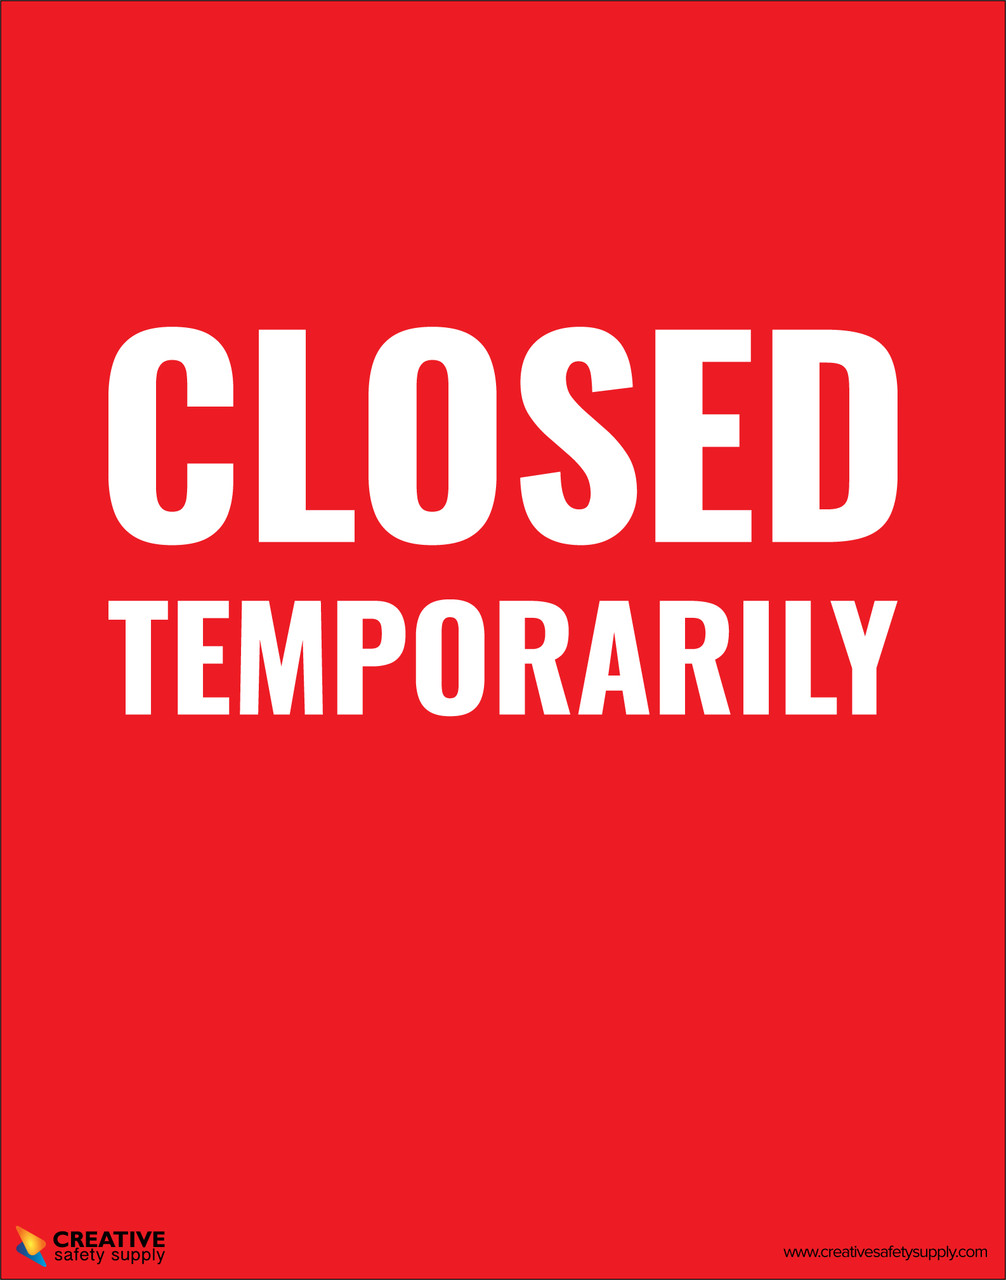 Closed Temporarily - Poster